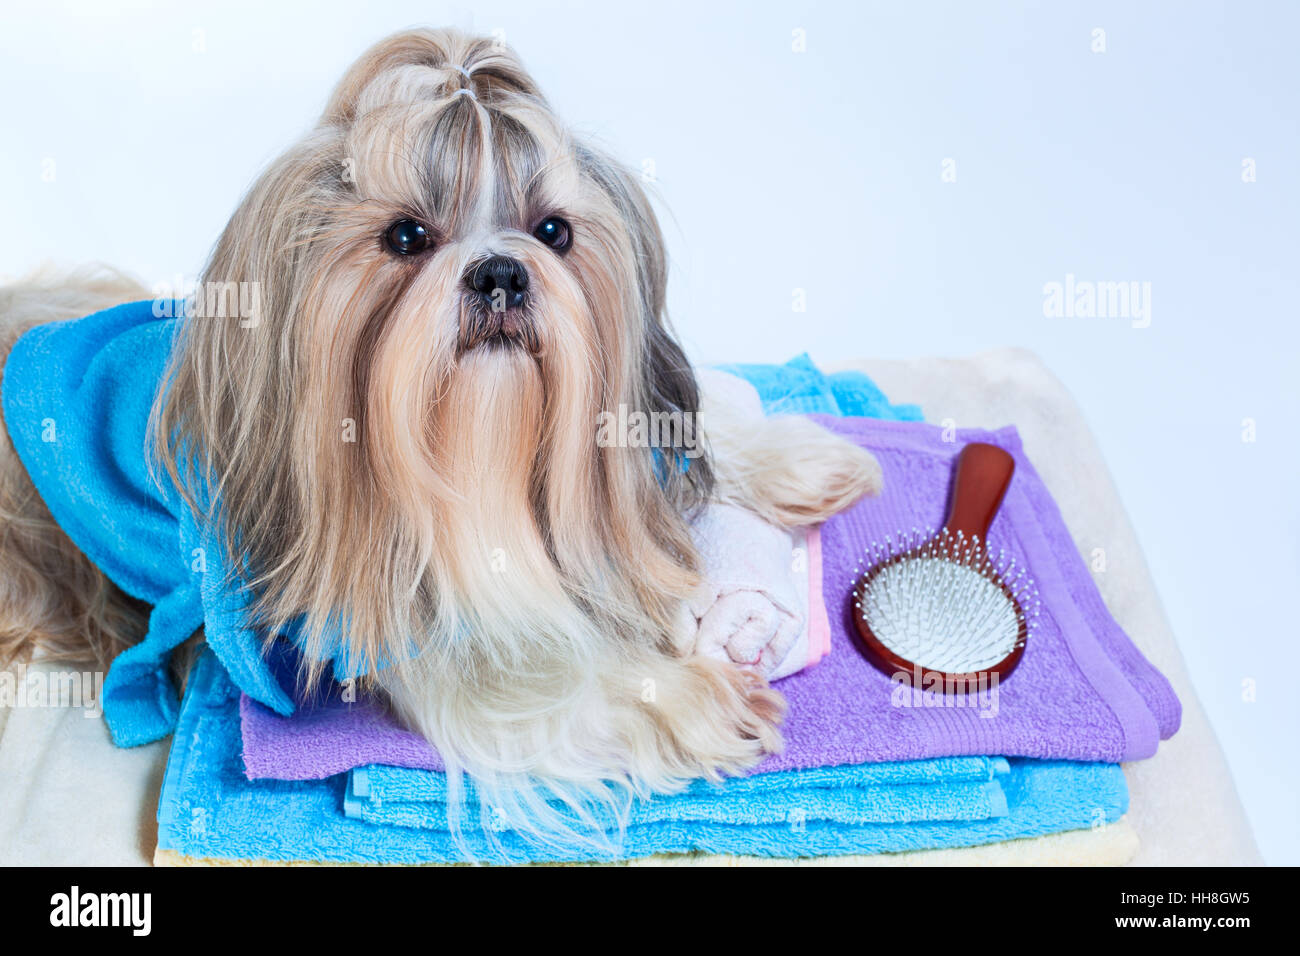 Shih tzu dog after washing. With towels and comb. On white background. Stock Photo